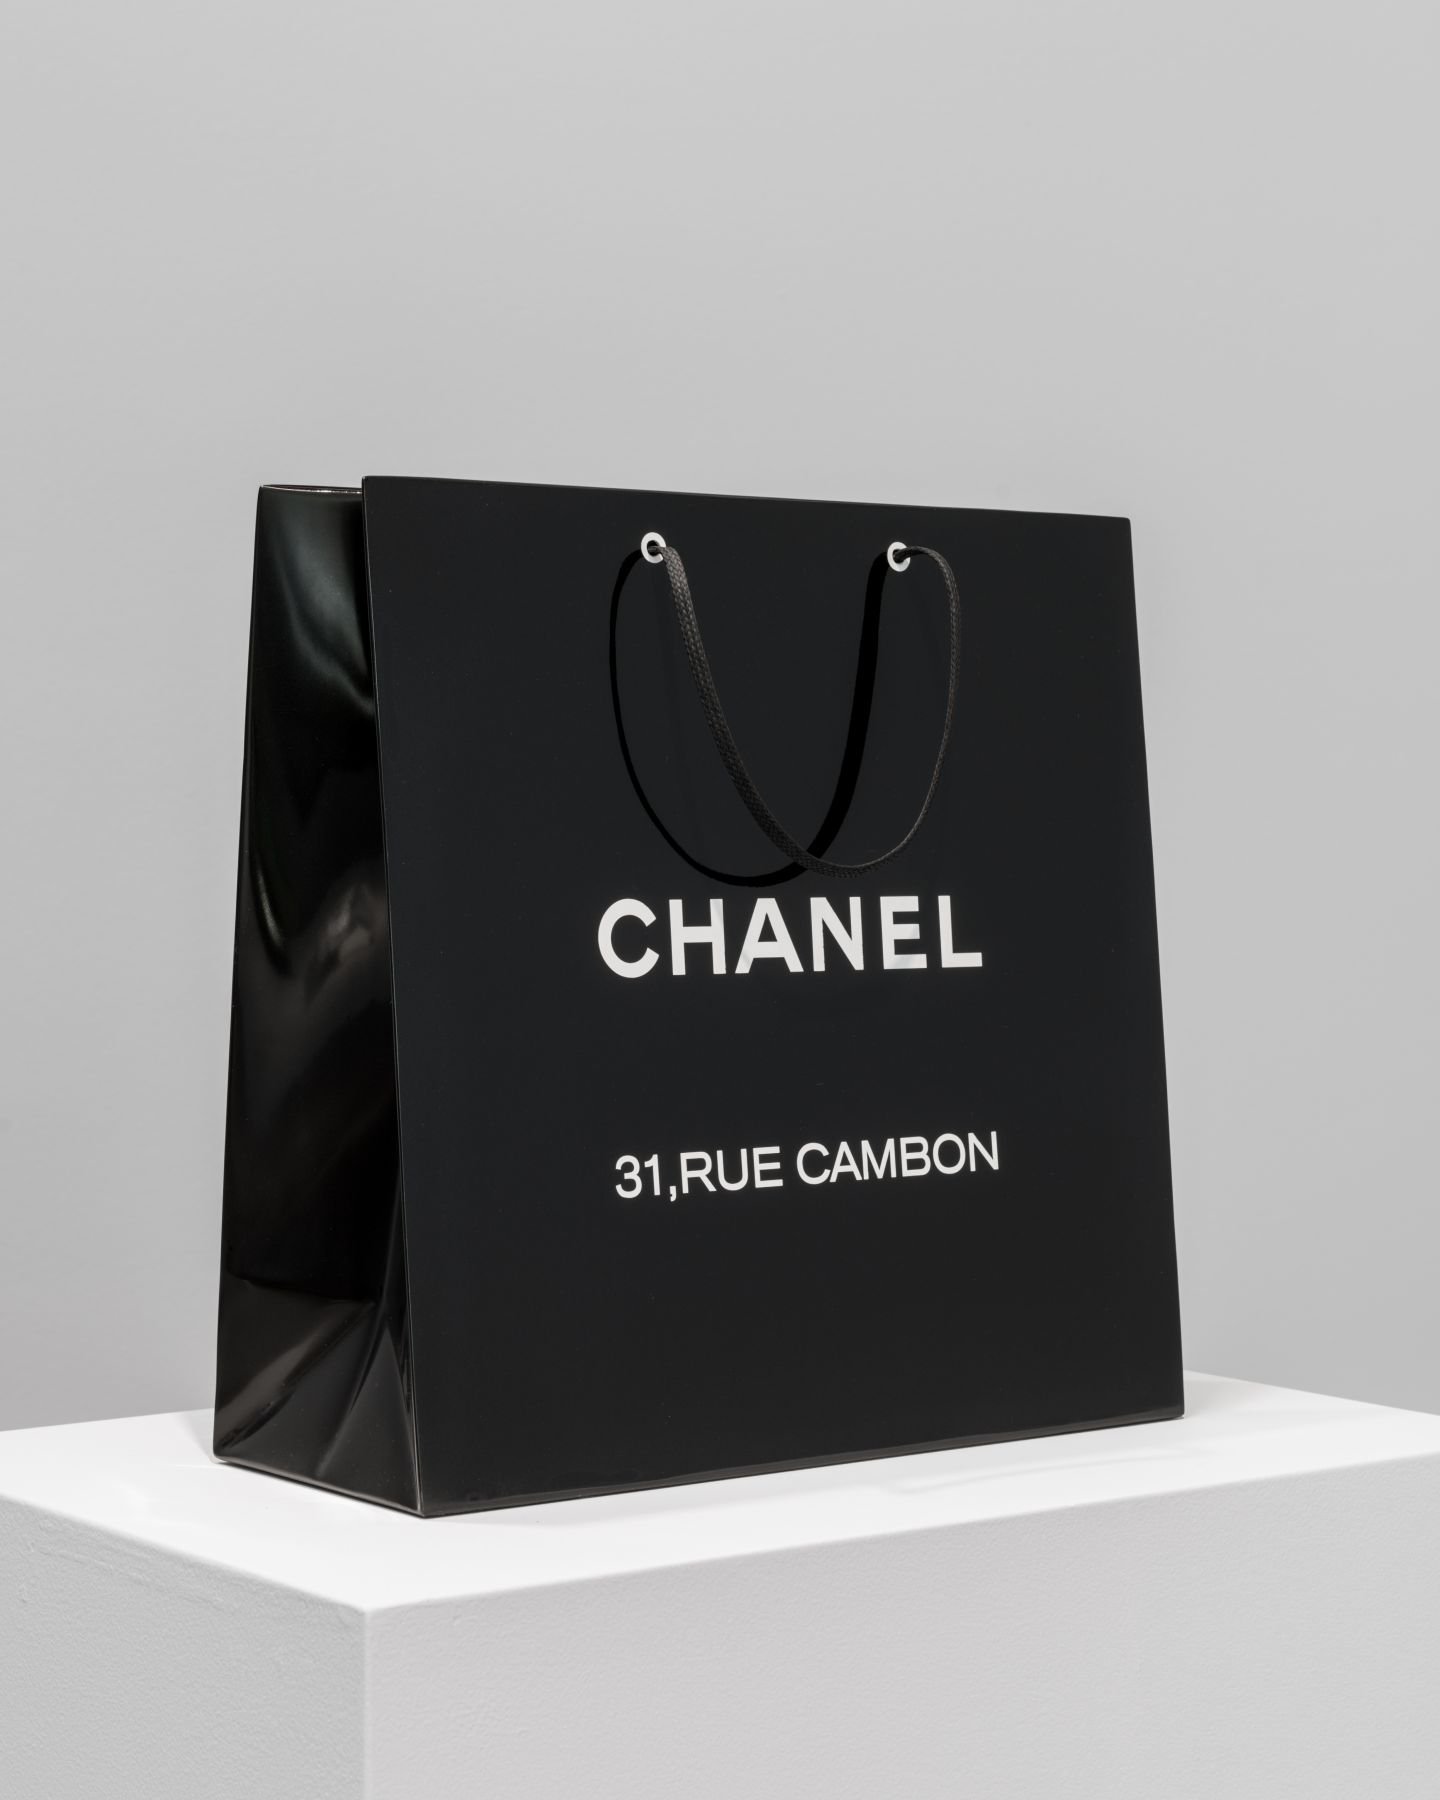 Chanel rue cambon White paper bags  Paper carrier bags, Paper bag, Chanel